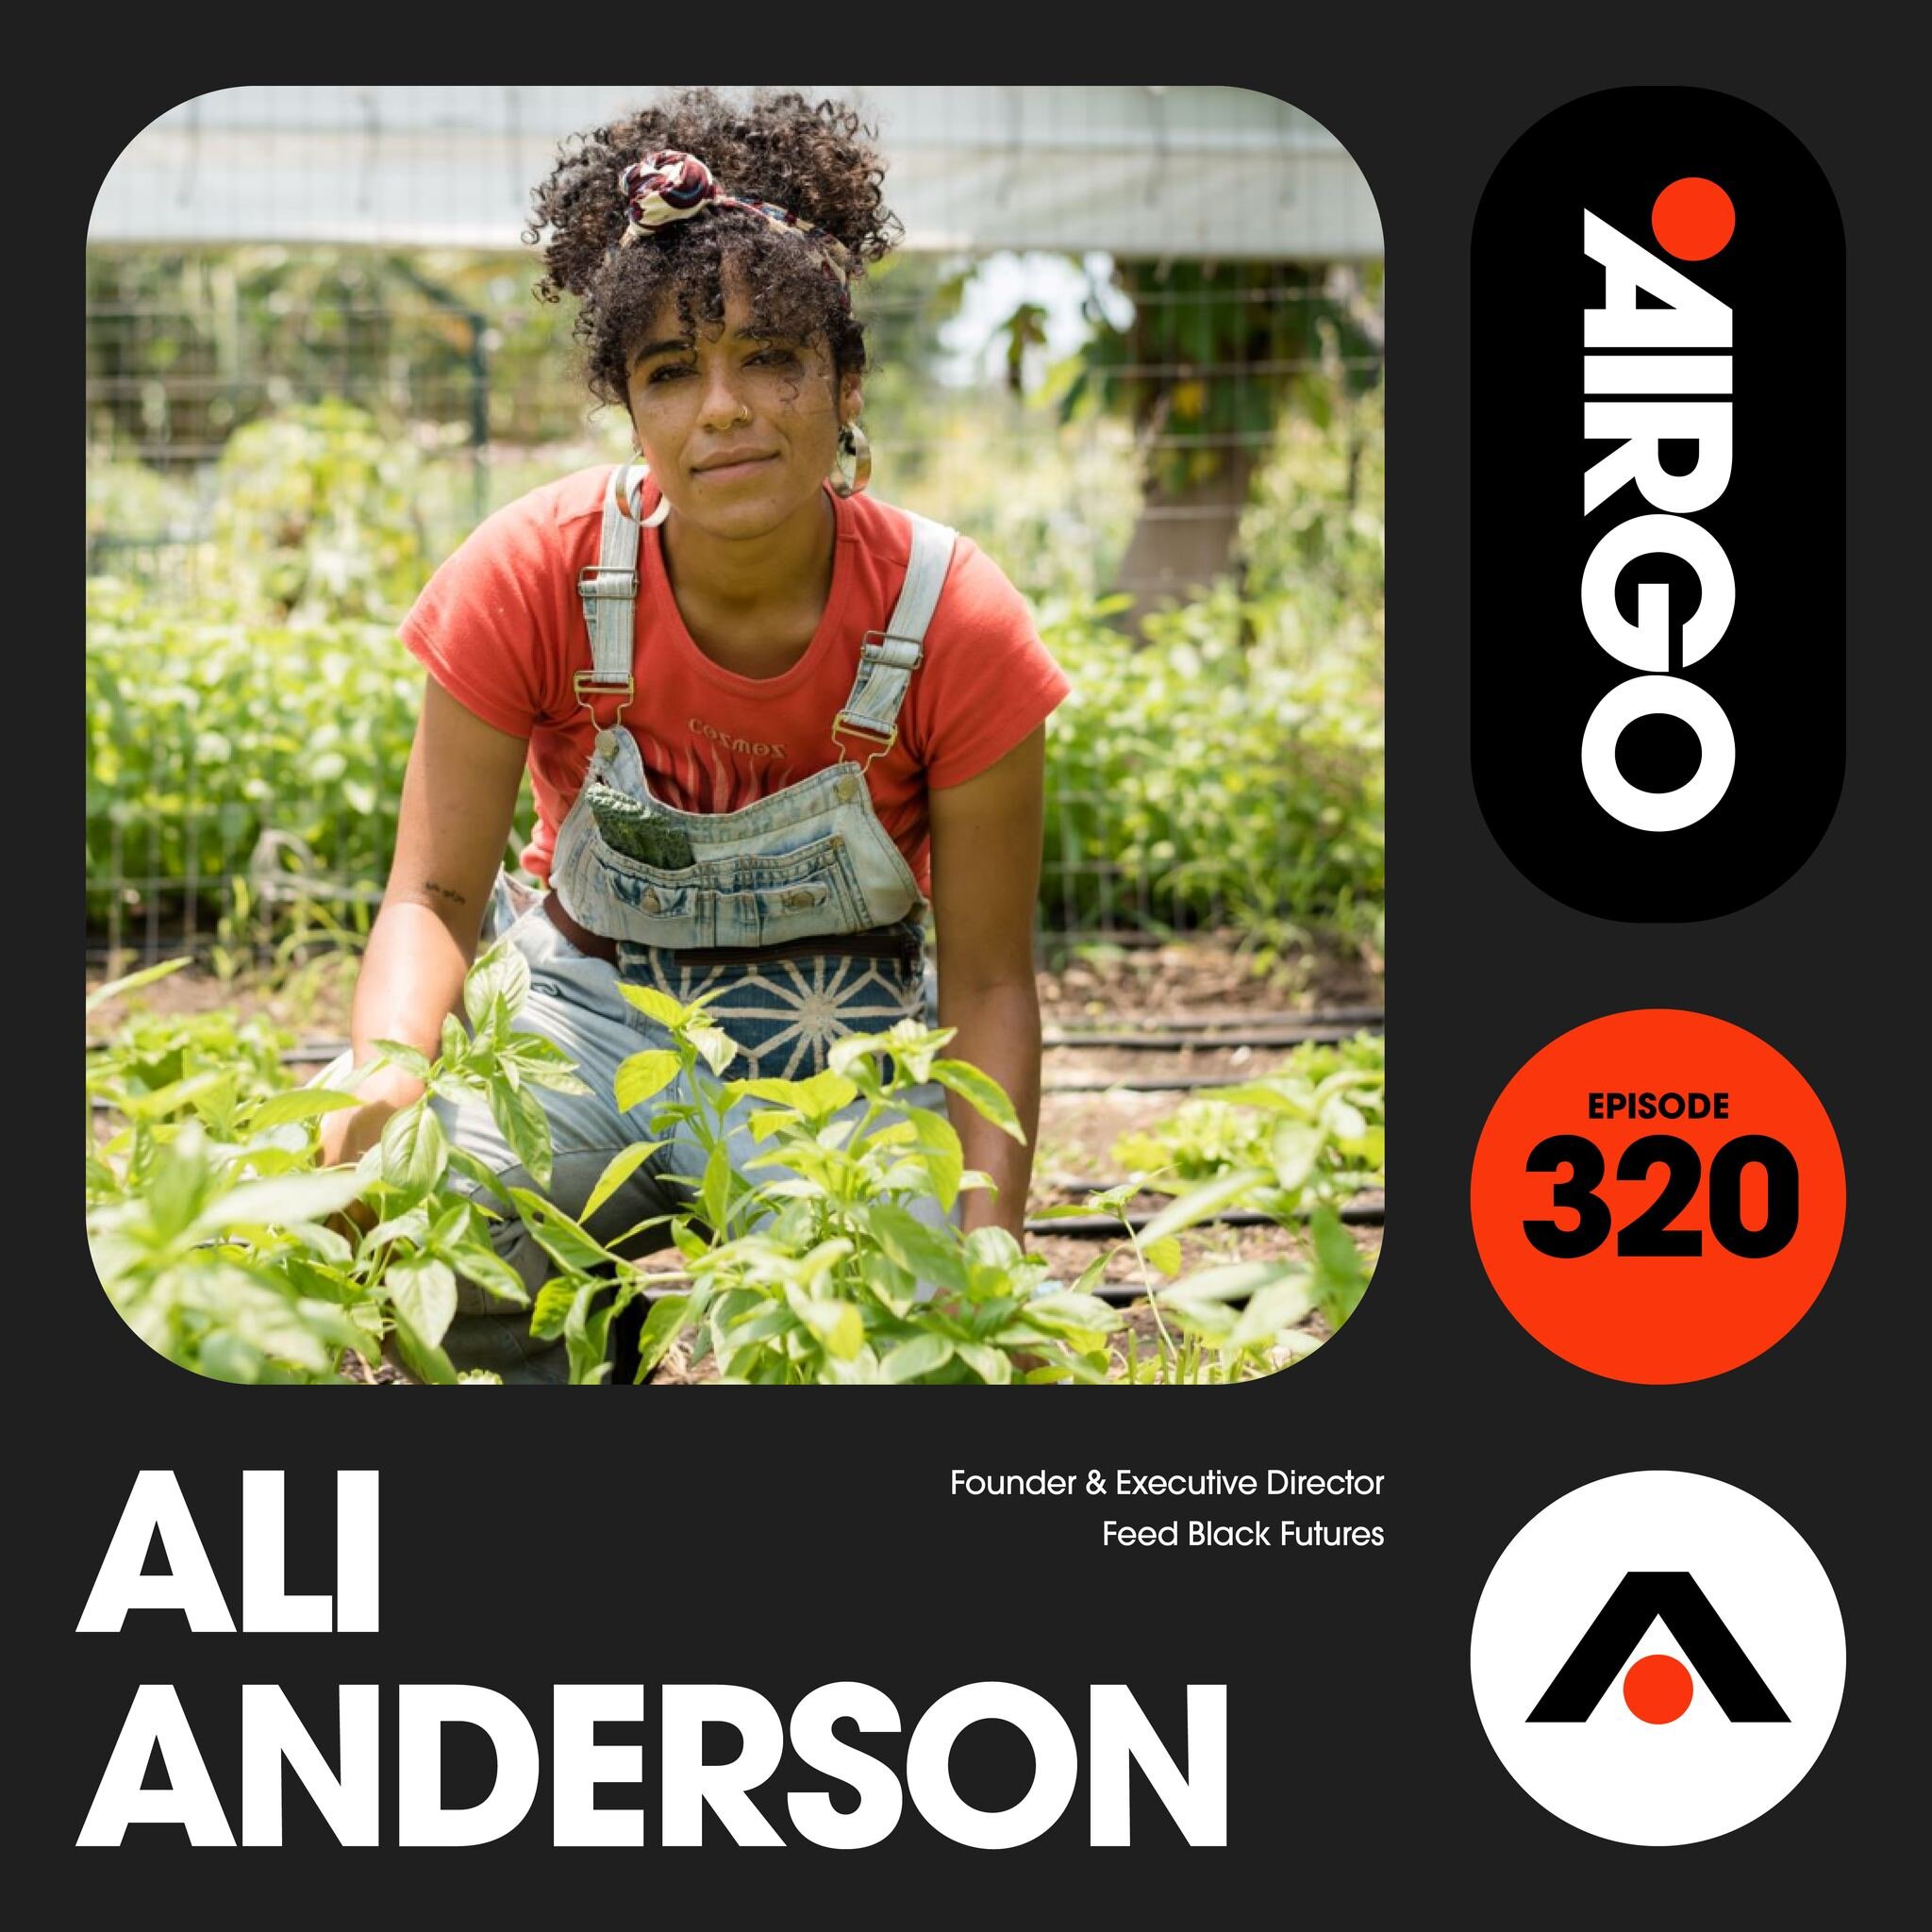 Episode 320 of AirGo takes us to California with Ali Anderson, founder of @feedblackfutures!

FBF was created in 2020 as a crowdfunding campaign to feed 20 families for two weeks at the start of the pandemic. Soon, it became an organization that feed